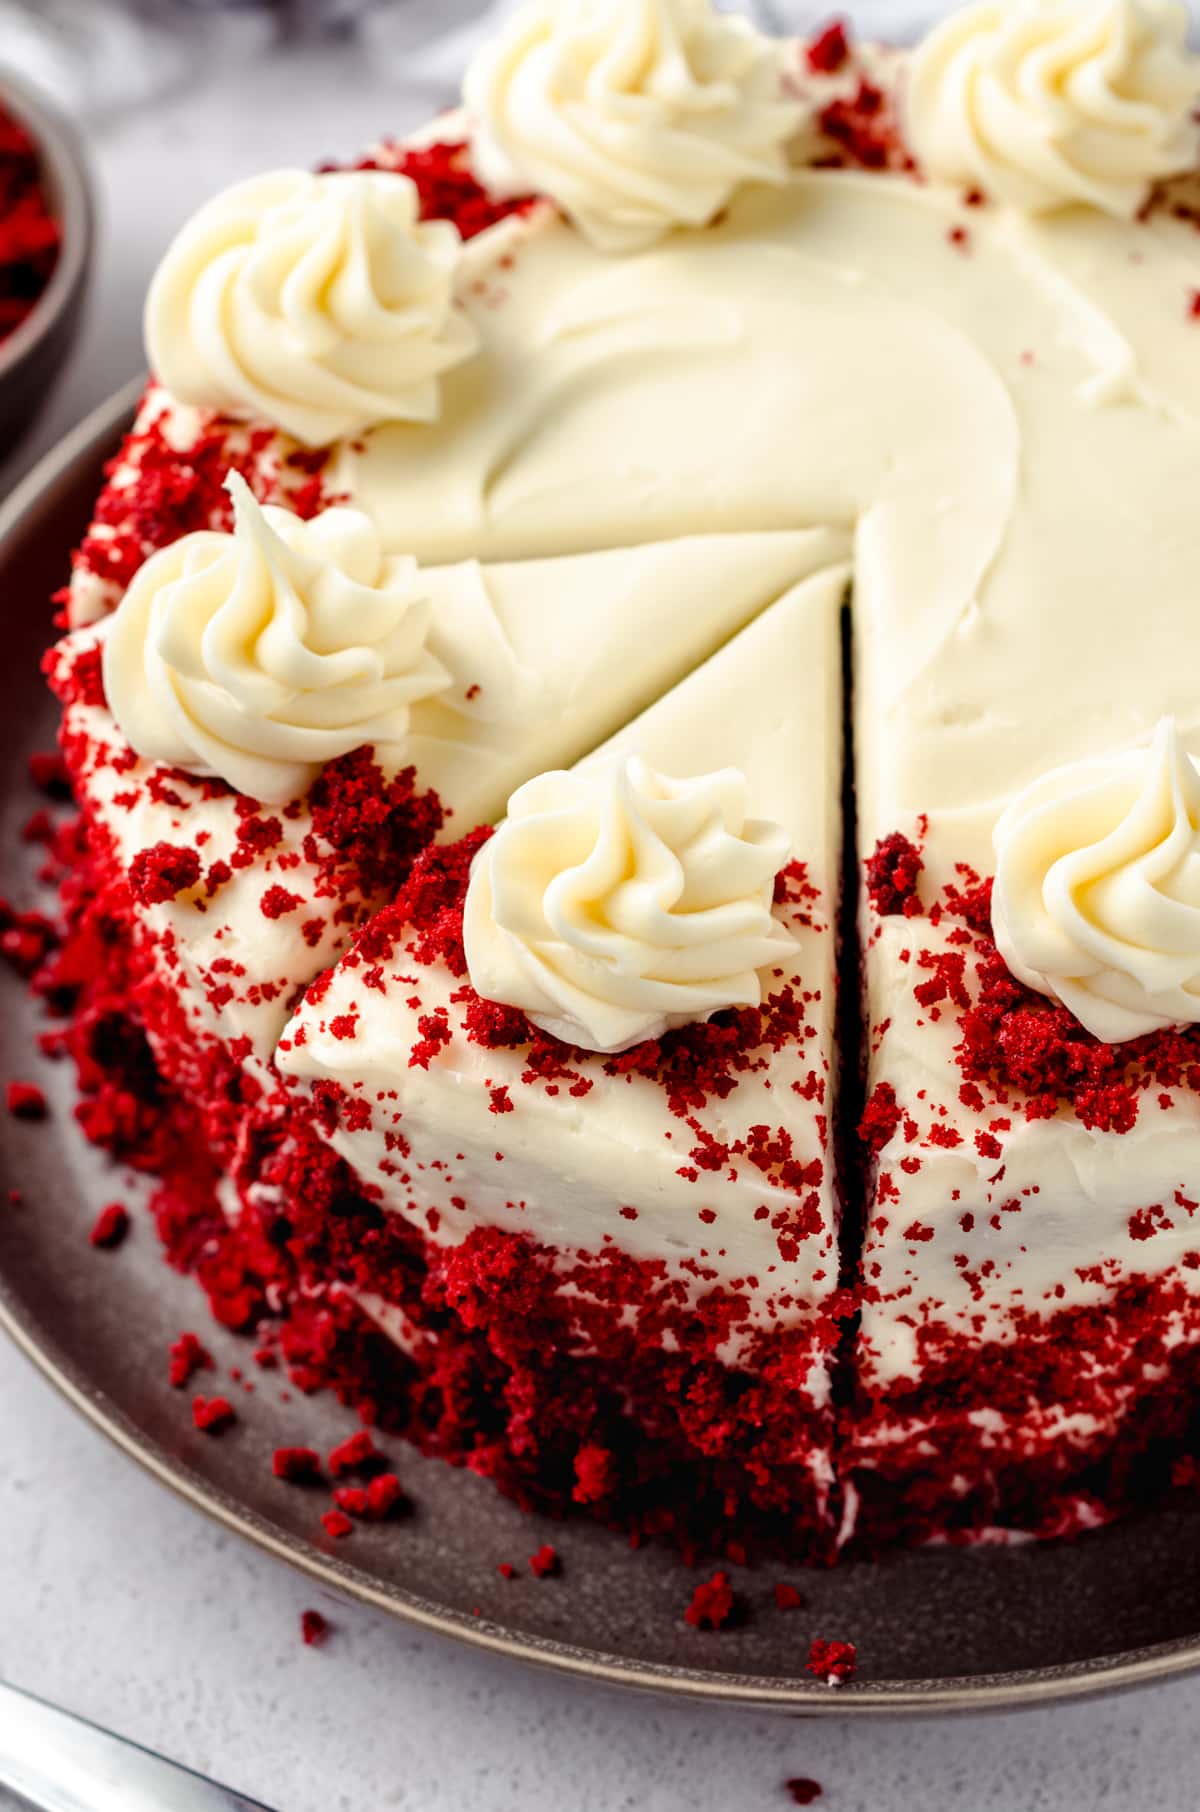 A red velvet cake with slice lines cut into it.